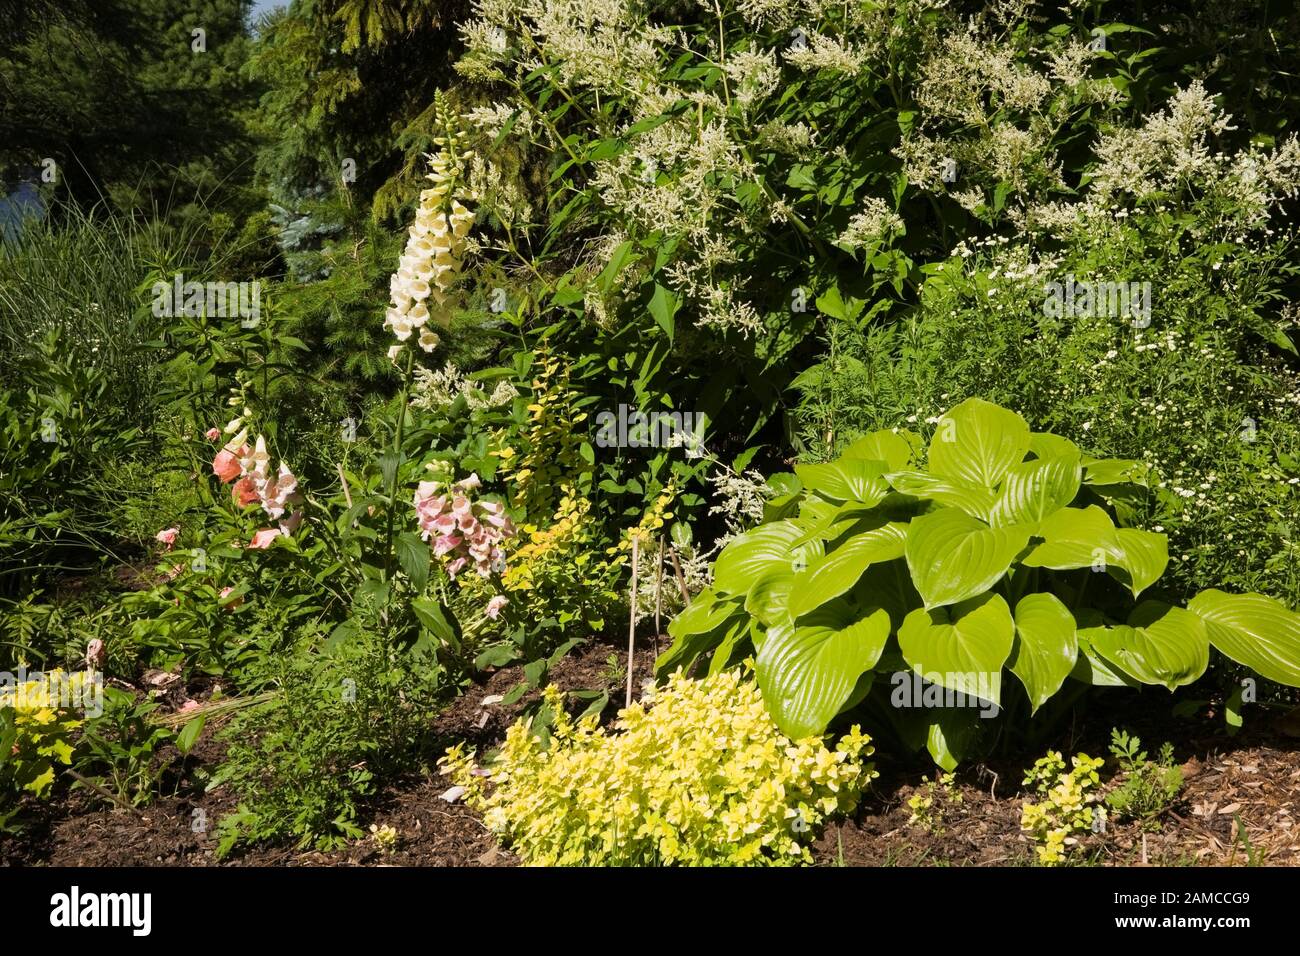 Border planted with Hosta plant and white flowering Persicaria polymorpha - Fleece flowers in private backyard garden in late spring. Stock Photo